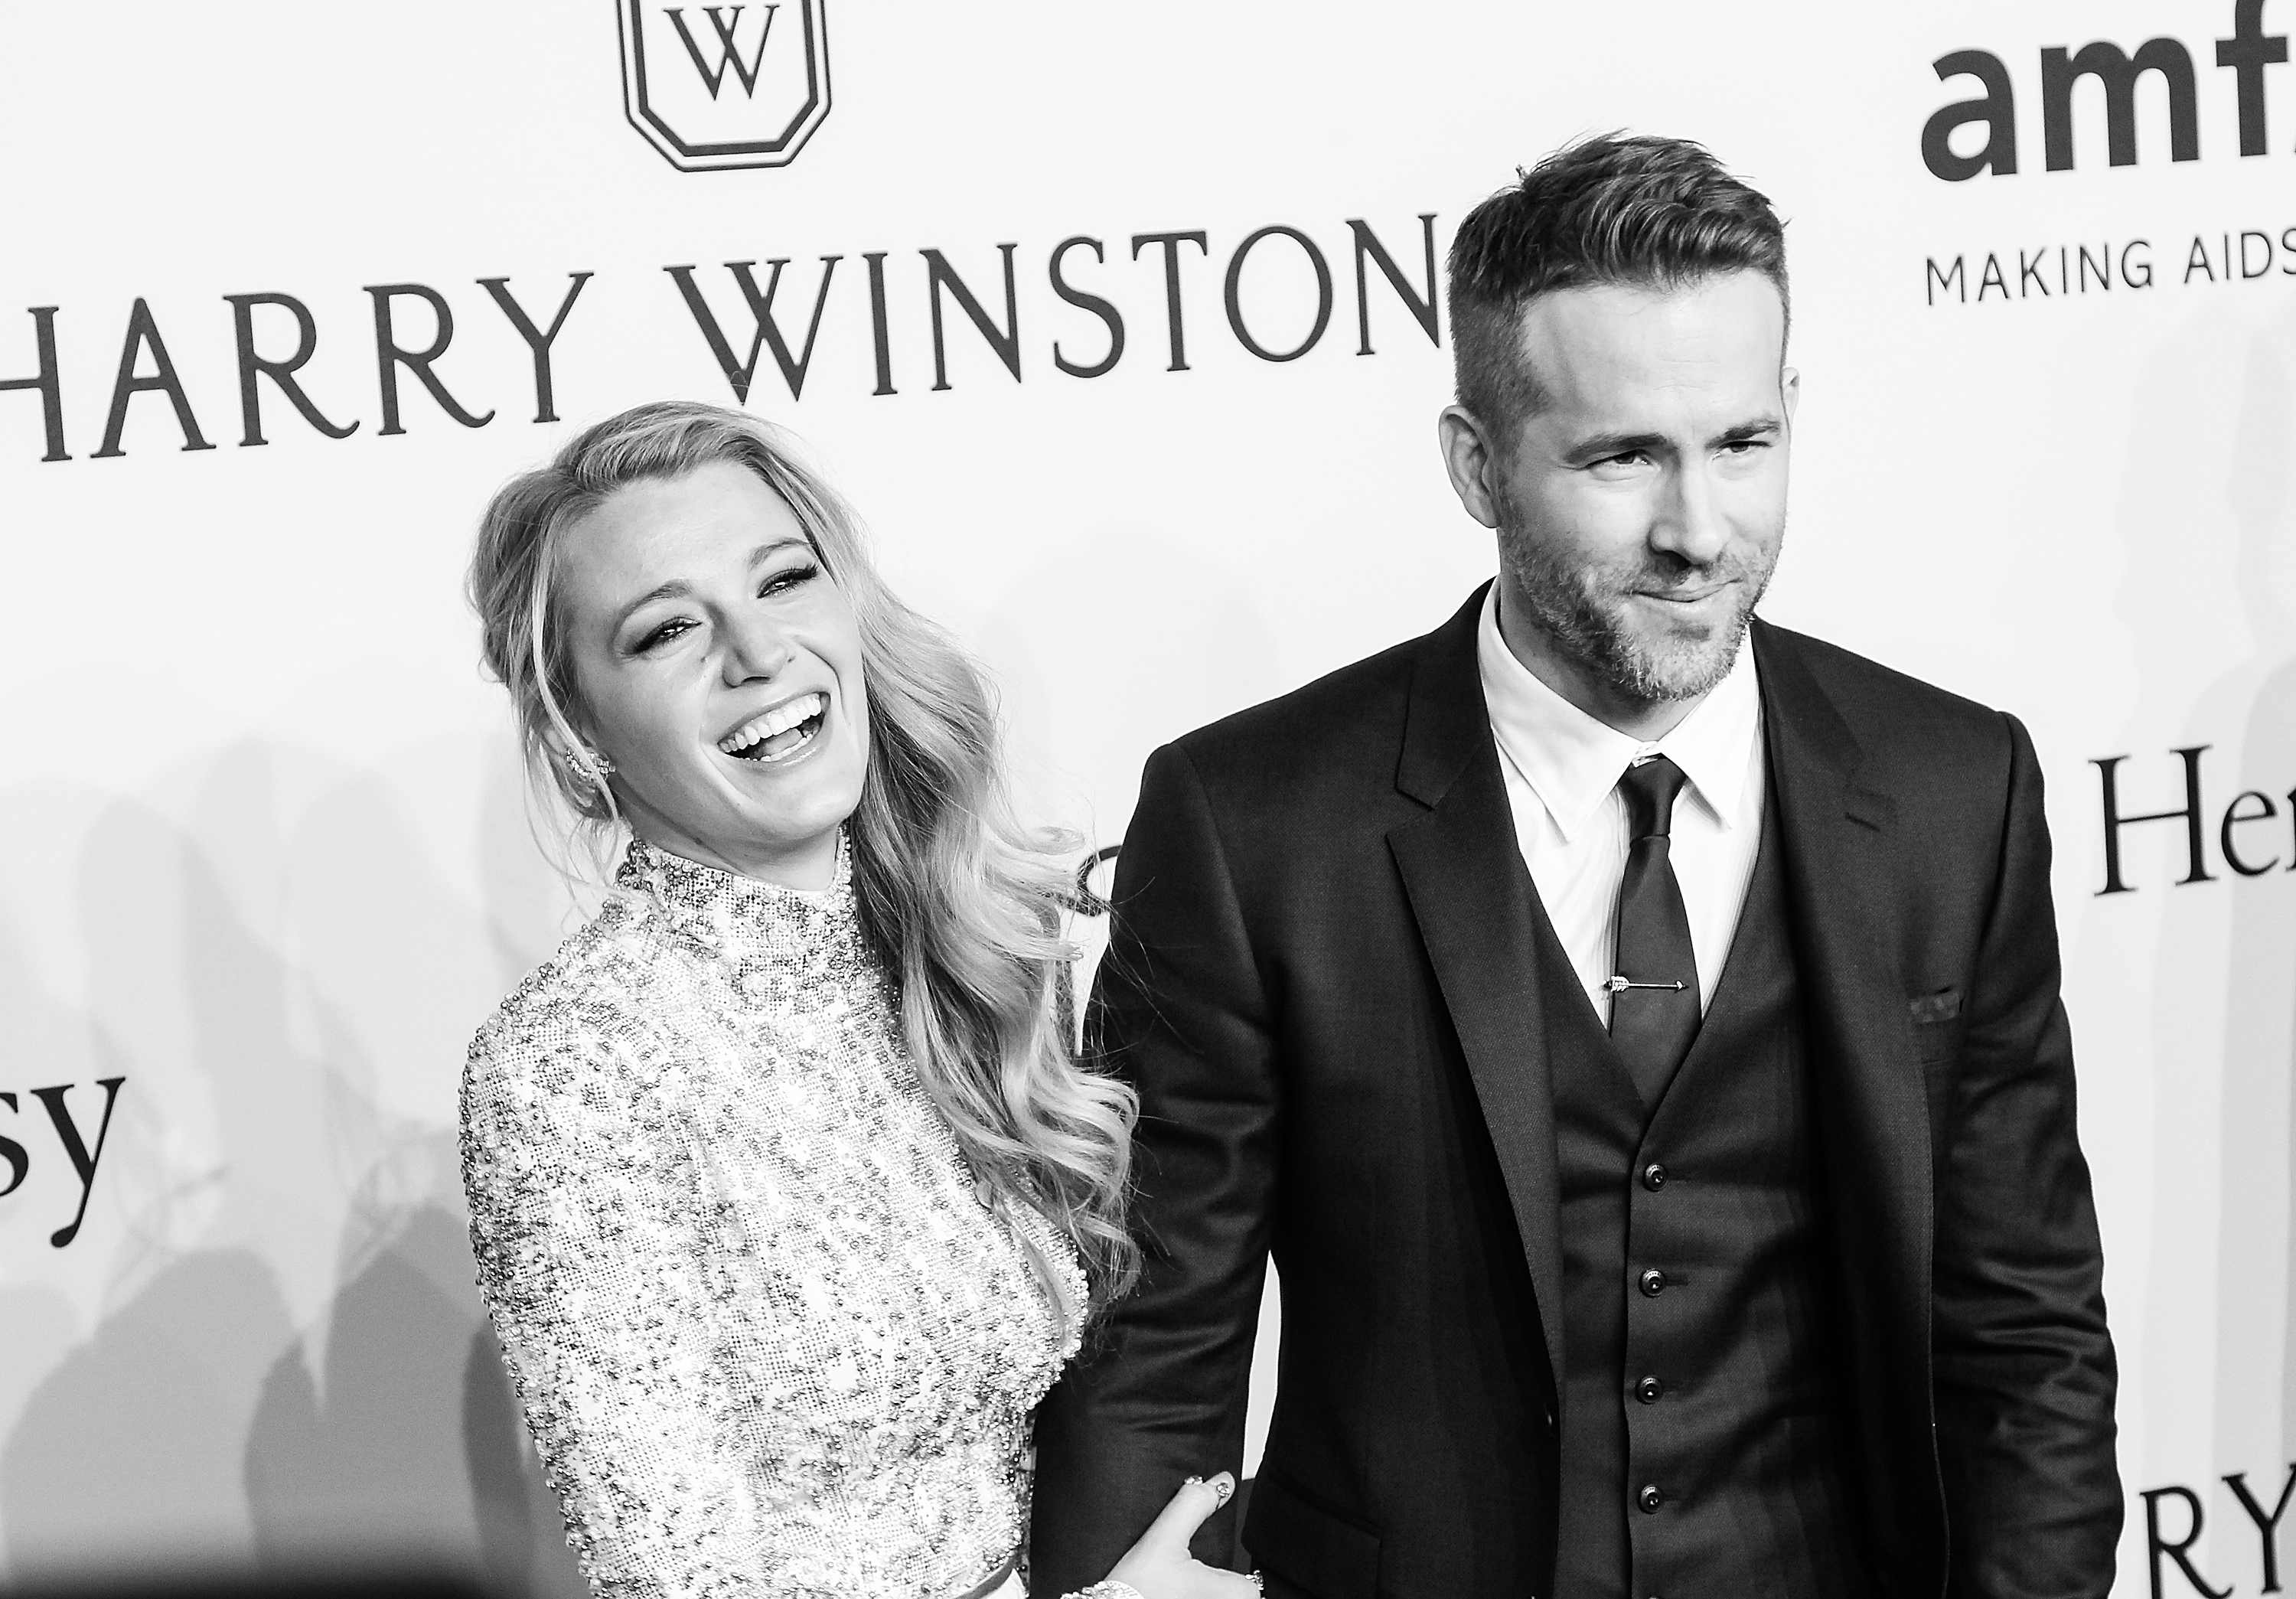 Blake Lively and Ryan Reynolds at Cipriani Wall Street on February 10, 2016 in New York City. (Bennett Raglin&mdash;Getty Images)